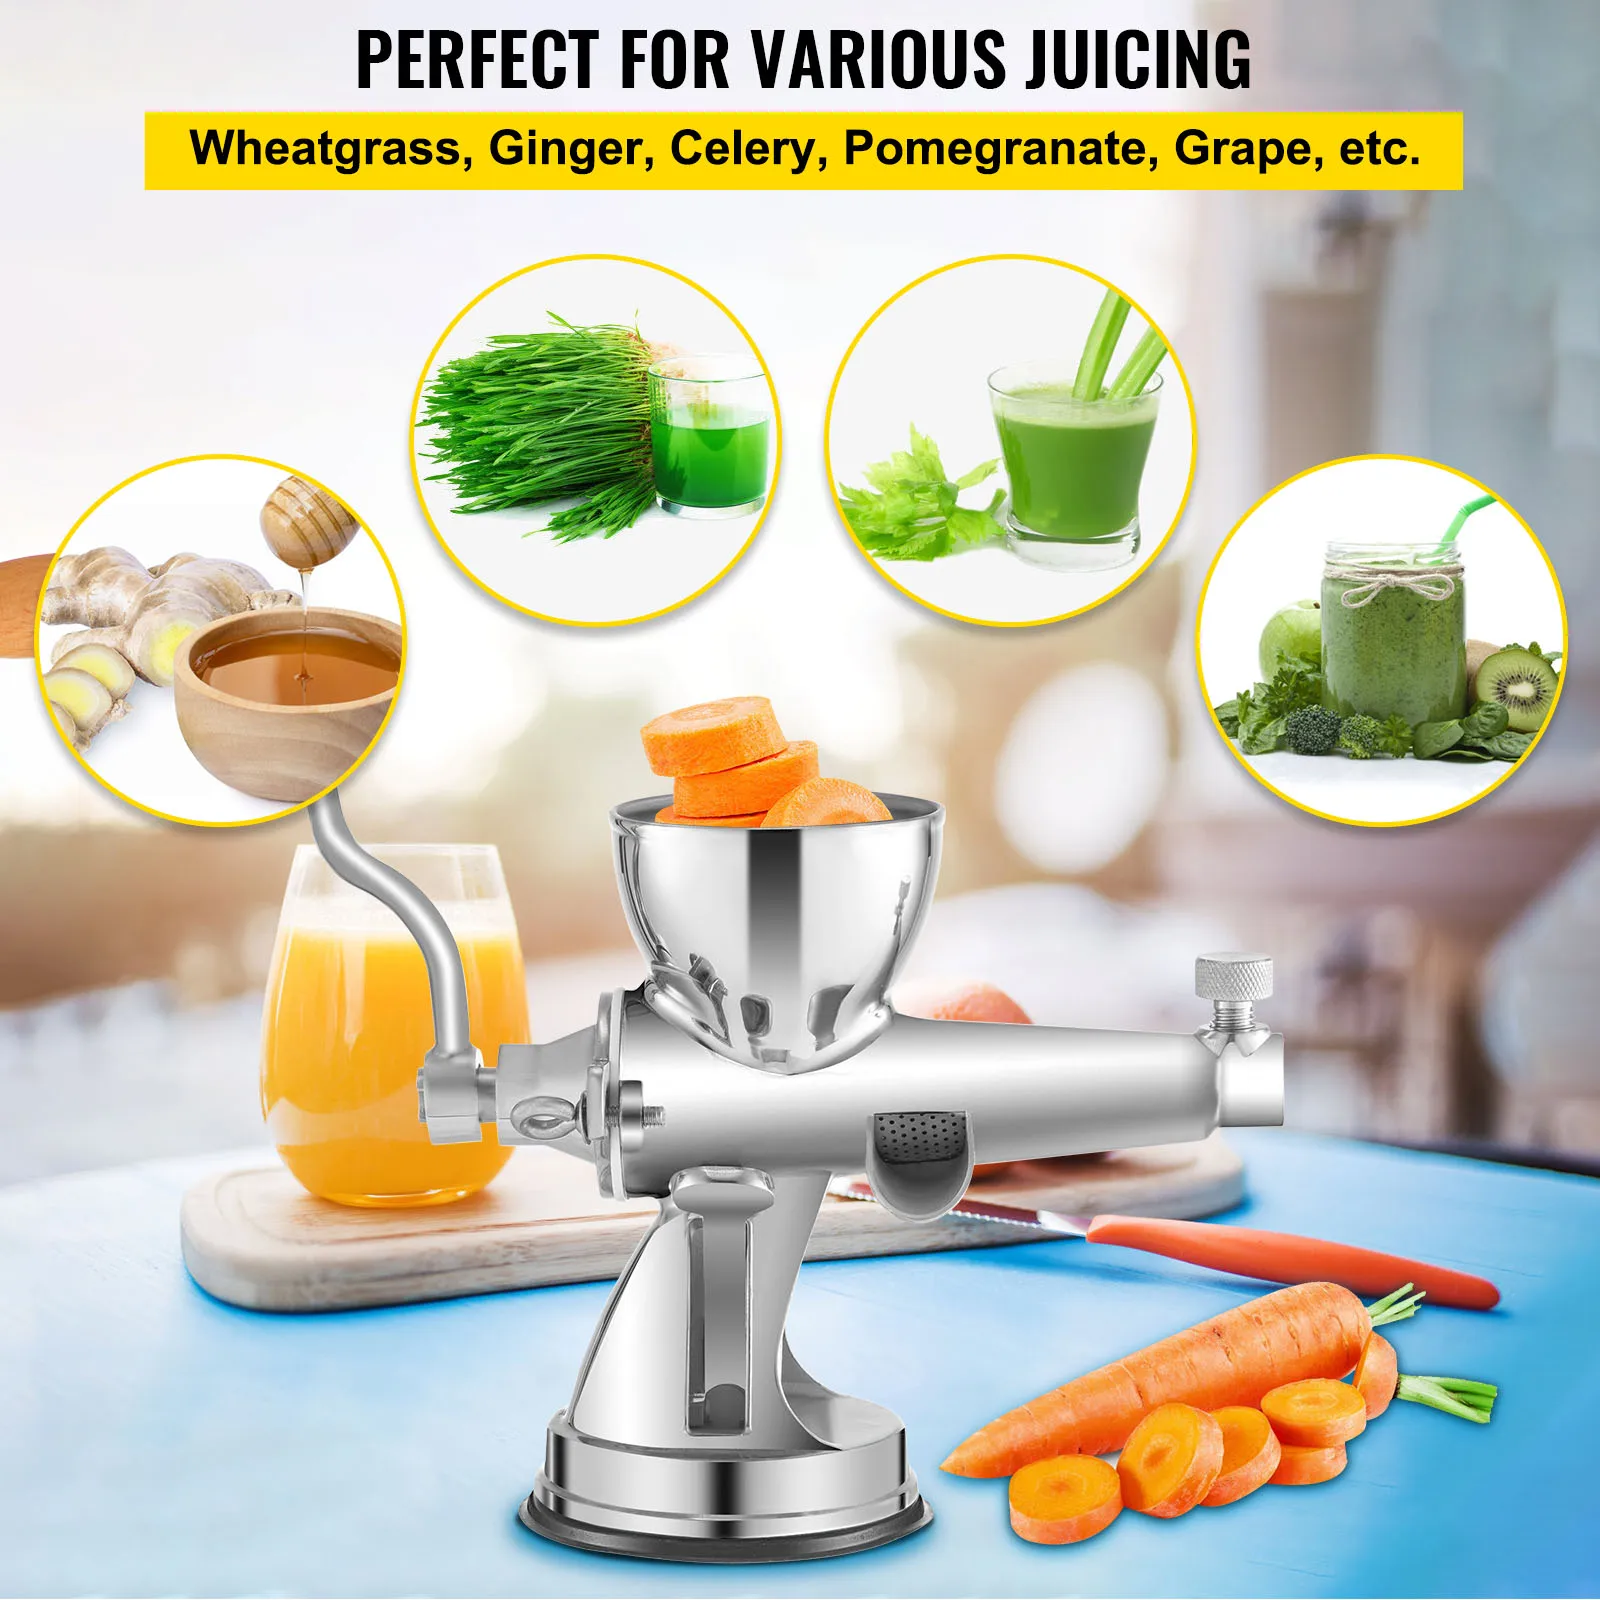 VEVOR Manual Wheatgrass Juicer Stainless Steel W/ Suction Cup Base Table-Top Clamp Extractor for Ginger Celery Home Kitchen Use